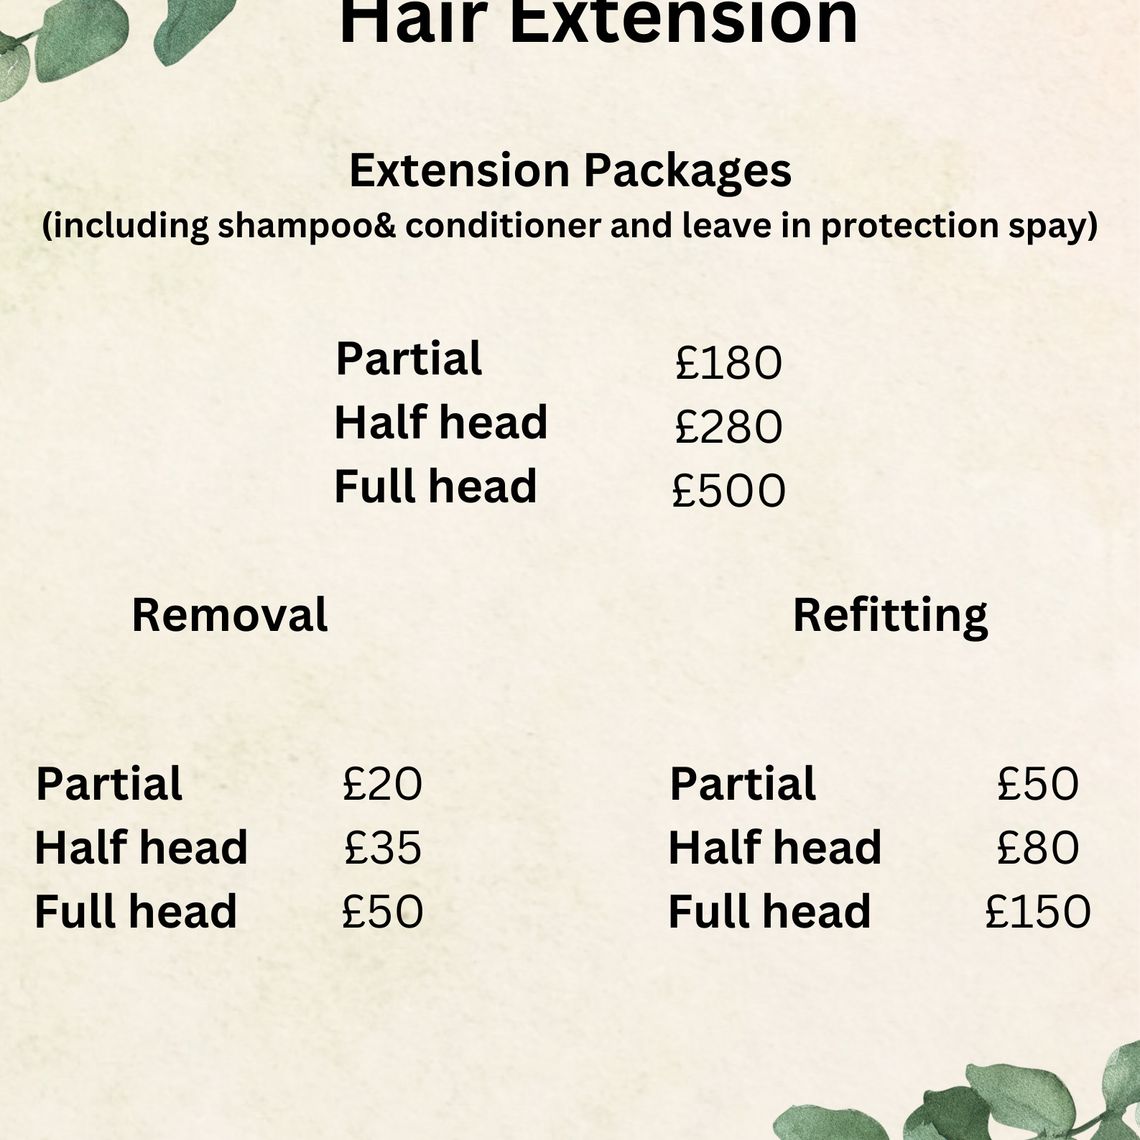 Hair Extension Price Guide